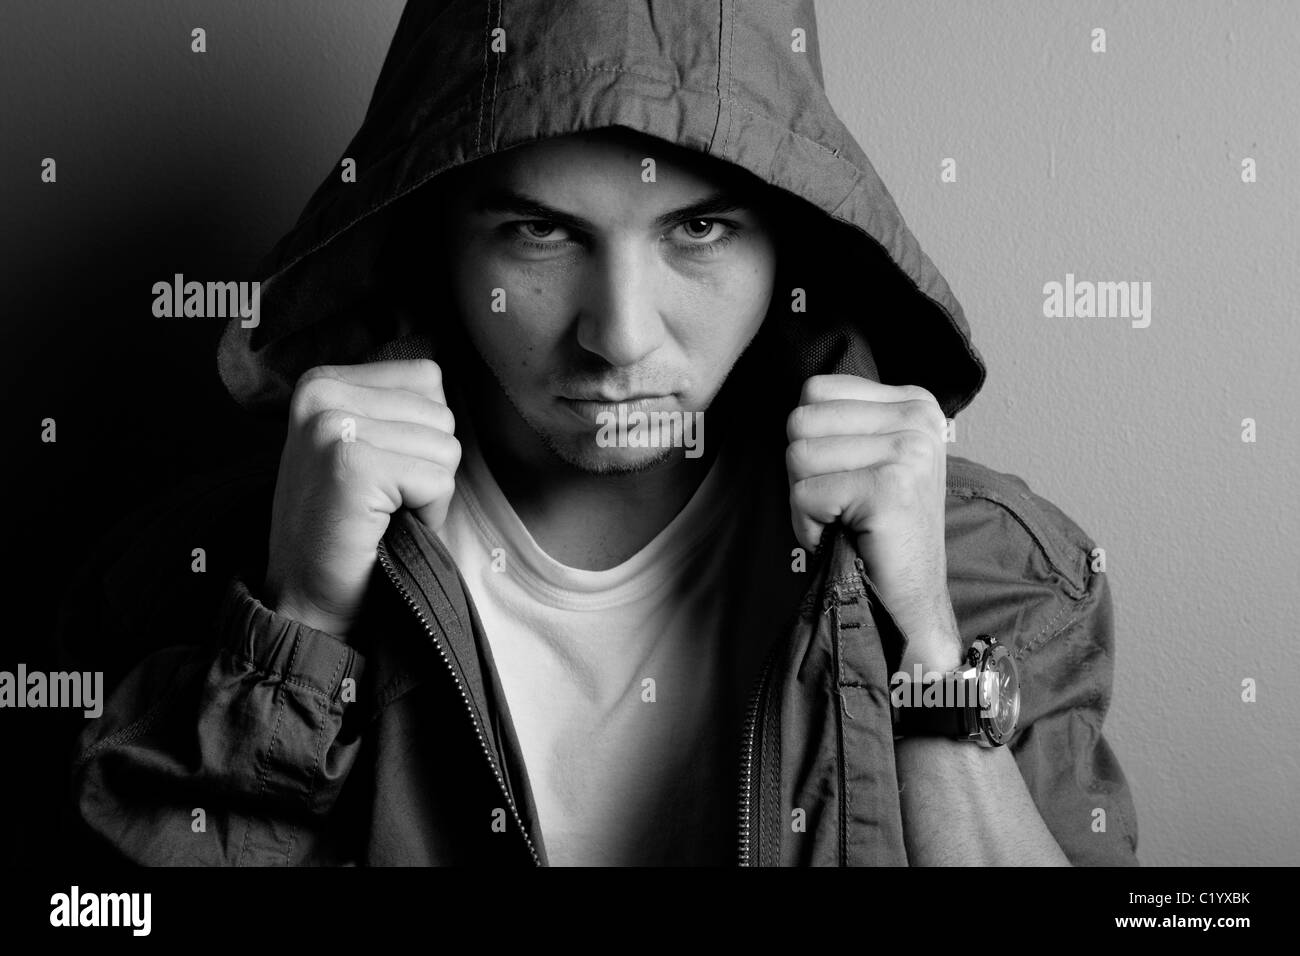 Photo of young adult male wearing hood, threatening expression on face. Stock Photo